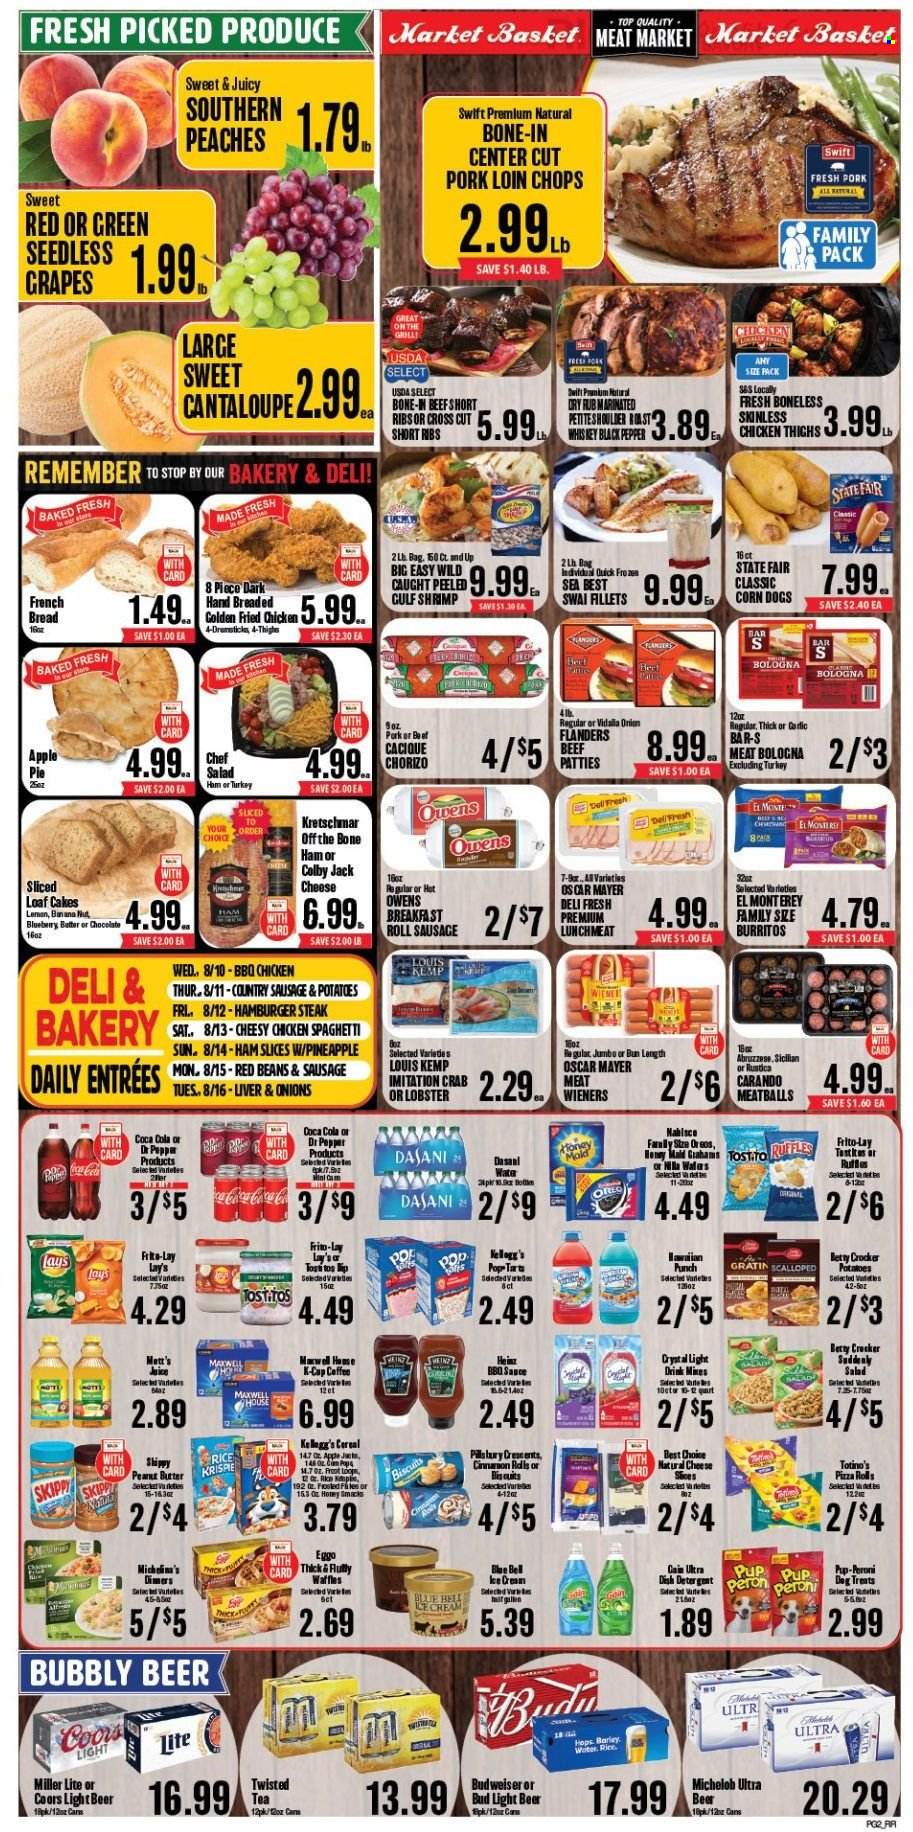 thumbnail - Market Basket Flyer - 08/10/2022 - 08/16/2022 - Sales products - bread, cake, pie, pizza rolls, french bread, apple pie, waffles, cantaloupe, potatoes, onion, salad, grapes, seedless grapes, pineapple, Mott's, lobster, crab, shrimps, swai fillet, spaghetti, pizza, meatballs, hamburger, sauce, burrito, ham, chorizo, ham off the bone, Oscar Mayer, lunch meat, Colby cheese, Oreo, ice cream, Blue Bell, Kellogg's, biscuit, Pop-Tarts, Lay’s, Frito-Lay, Ruffles, red beans, Heinz, cereals, Honey Maid, cinnamon, BBQ sauce, peanut butter, Coca-Cola, juice, Dr. Pepper, Maxwell House, tea, coffee, coffee capsules, K-Cups, punch, beer, Bud Light, chicken thighs, beef ribs, steak, pork chops, pork loin, pork meat, detergent, Gain, Pup-Peroni, Budweiser, Miller Lite, Coors, Twisted Tea, Michelob, peaches. Page 2.